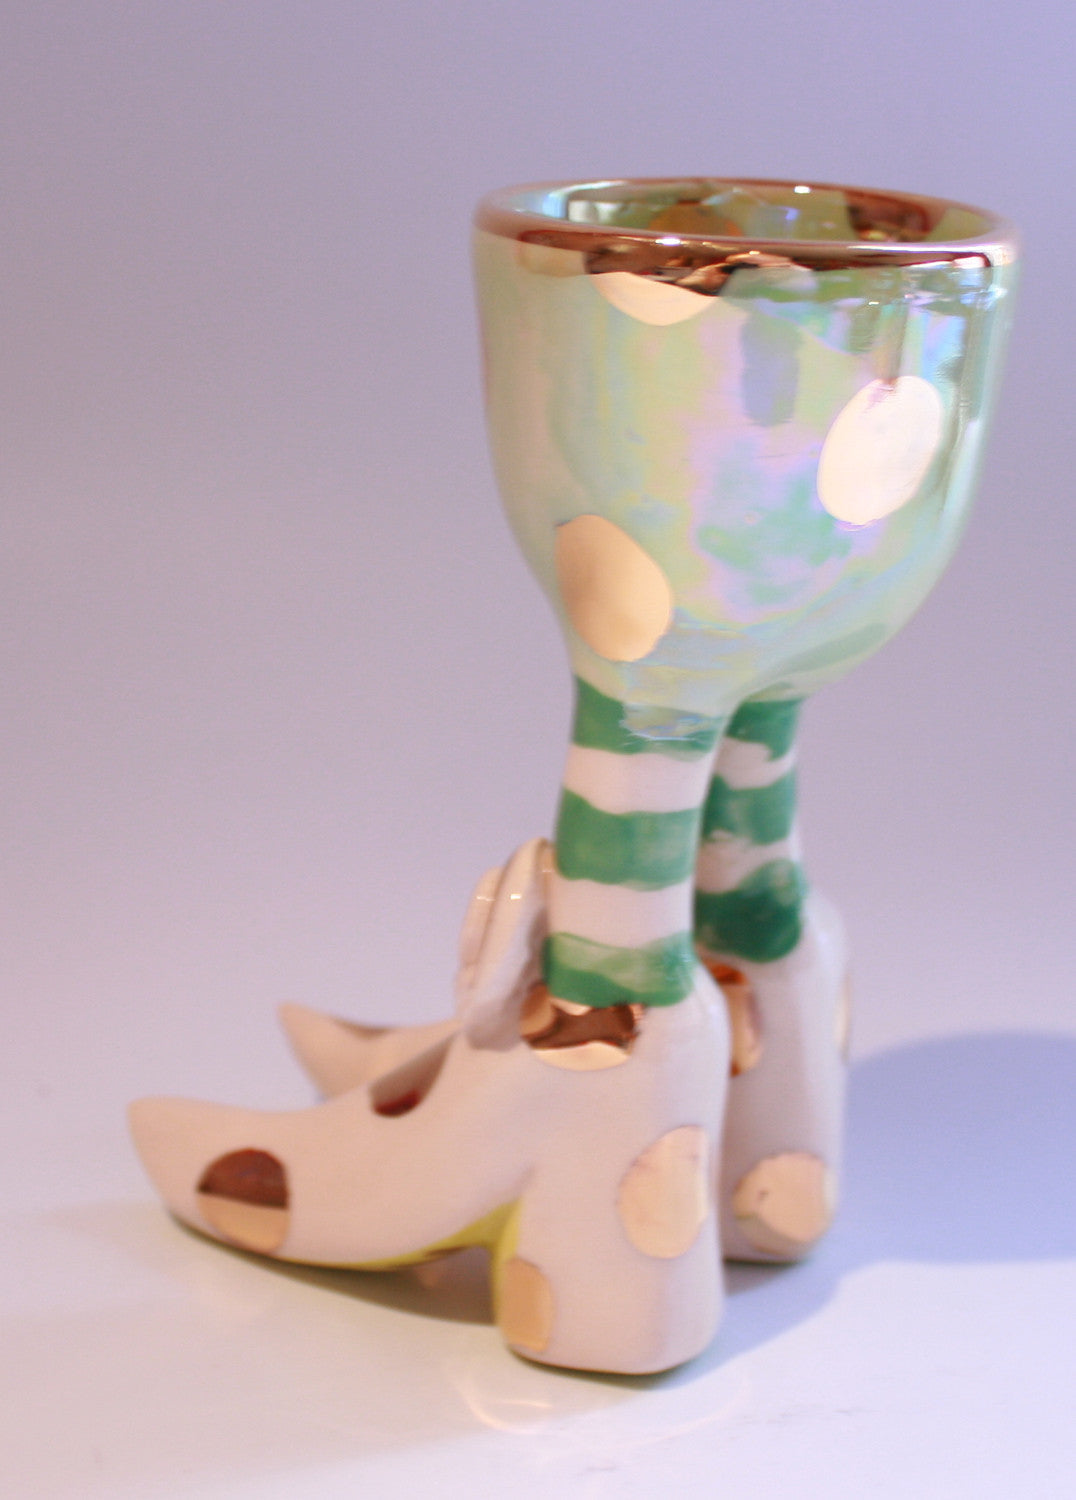 Egg Cup with Pale Green and Gold Dots - MaryRoseYoung